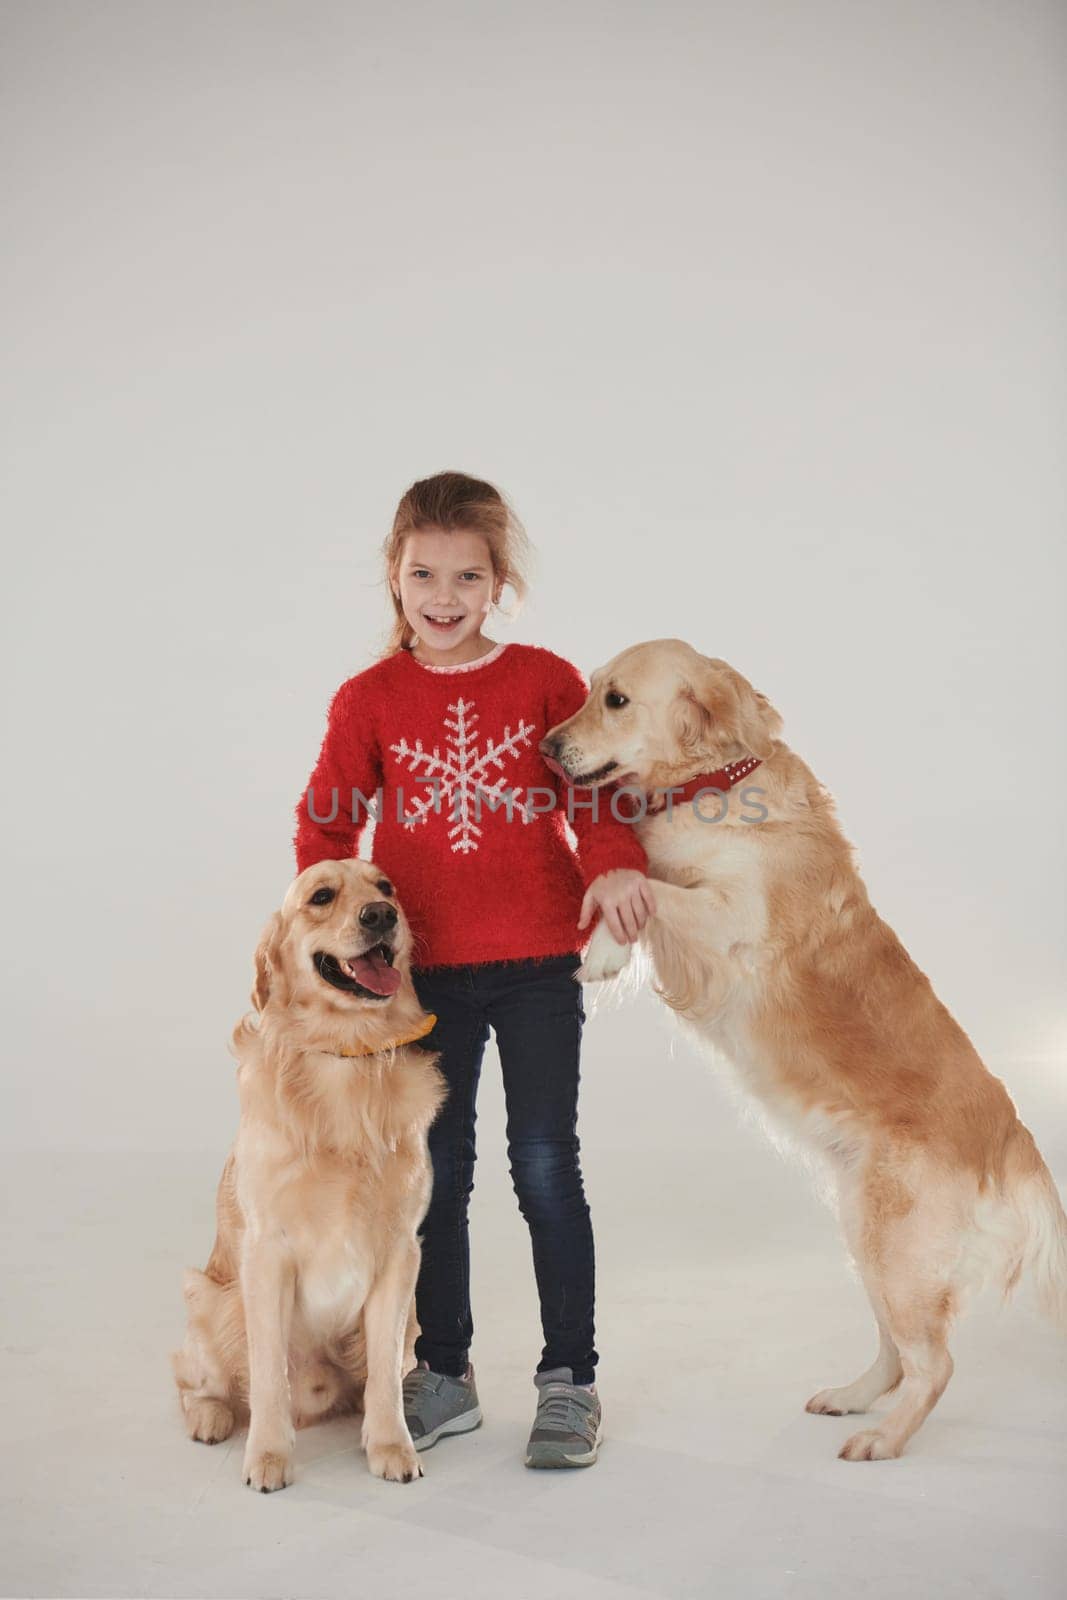 Little girl is with two Golden retrievers in the studio against white background by Standret